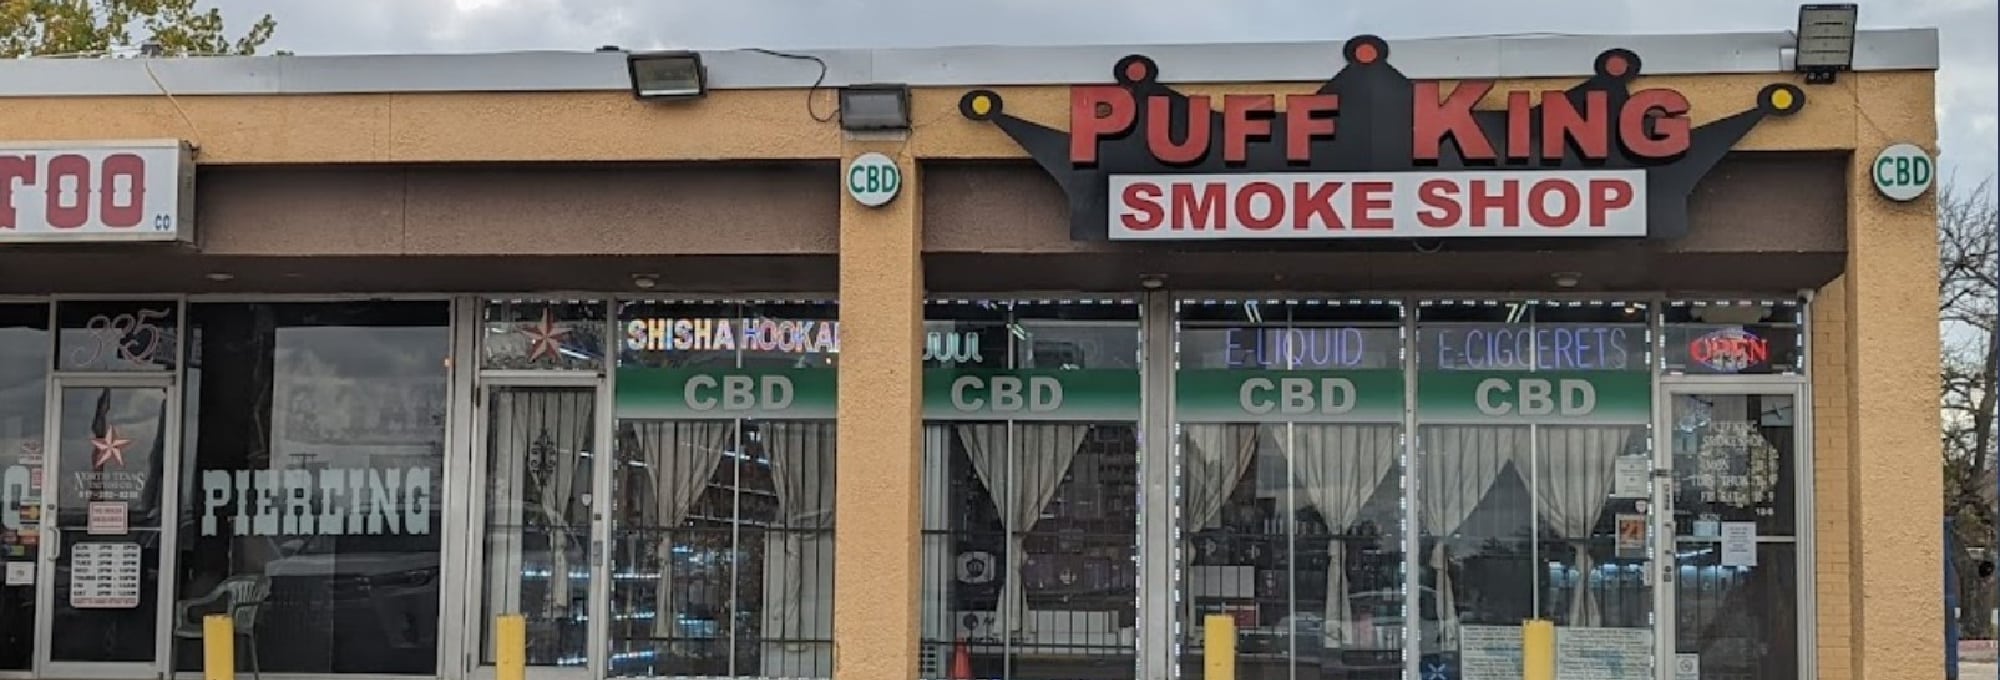 image of puff king smoke shop in richland hills tx